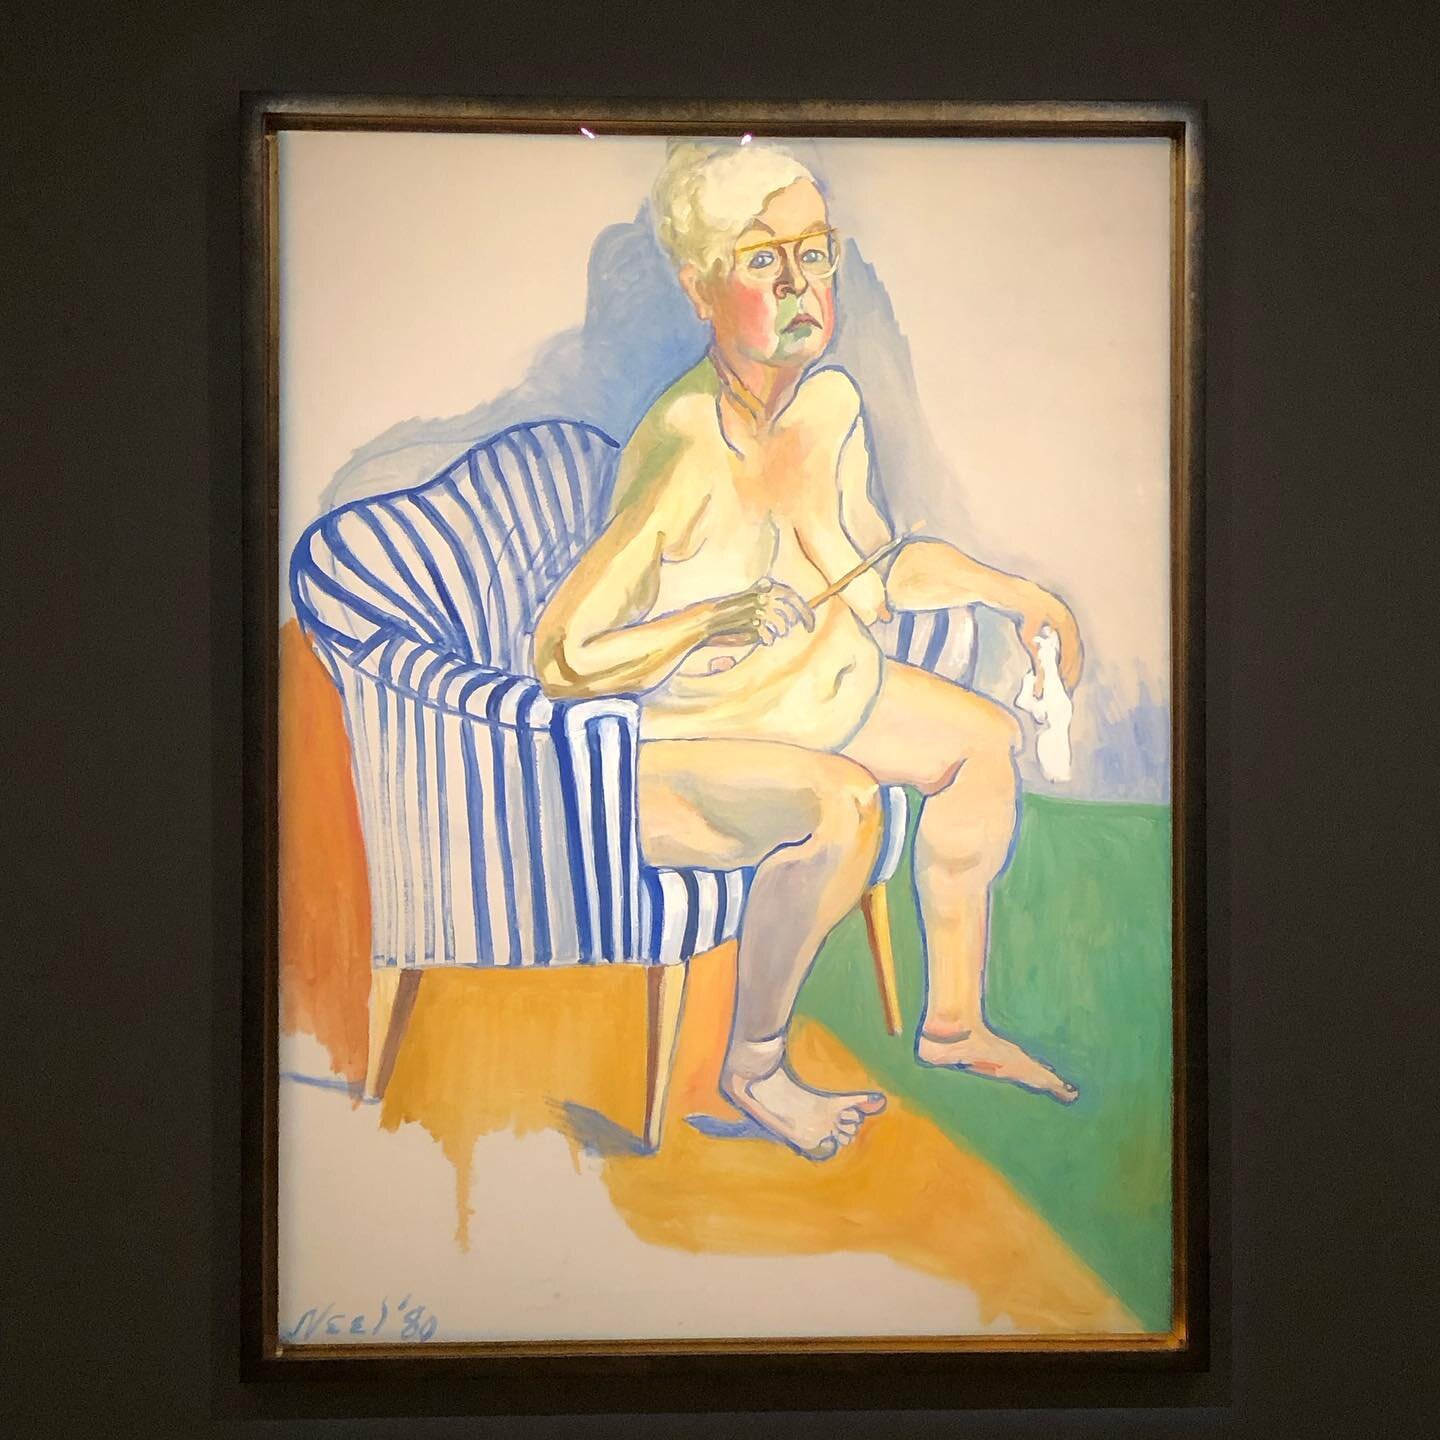 ... followed by another late-in-life self portrait, this time by the amazing Alice Neel at her retrospective Hot Off The Griddle at the Barbican
.
.
.
@barbicancentre @aliceneelartist #galleryvisit #hotoffthegriddle #barbican #americanartist #twentie